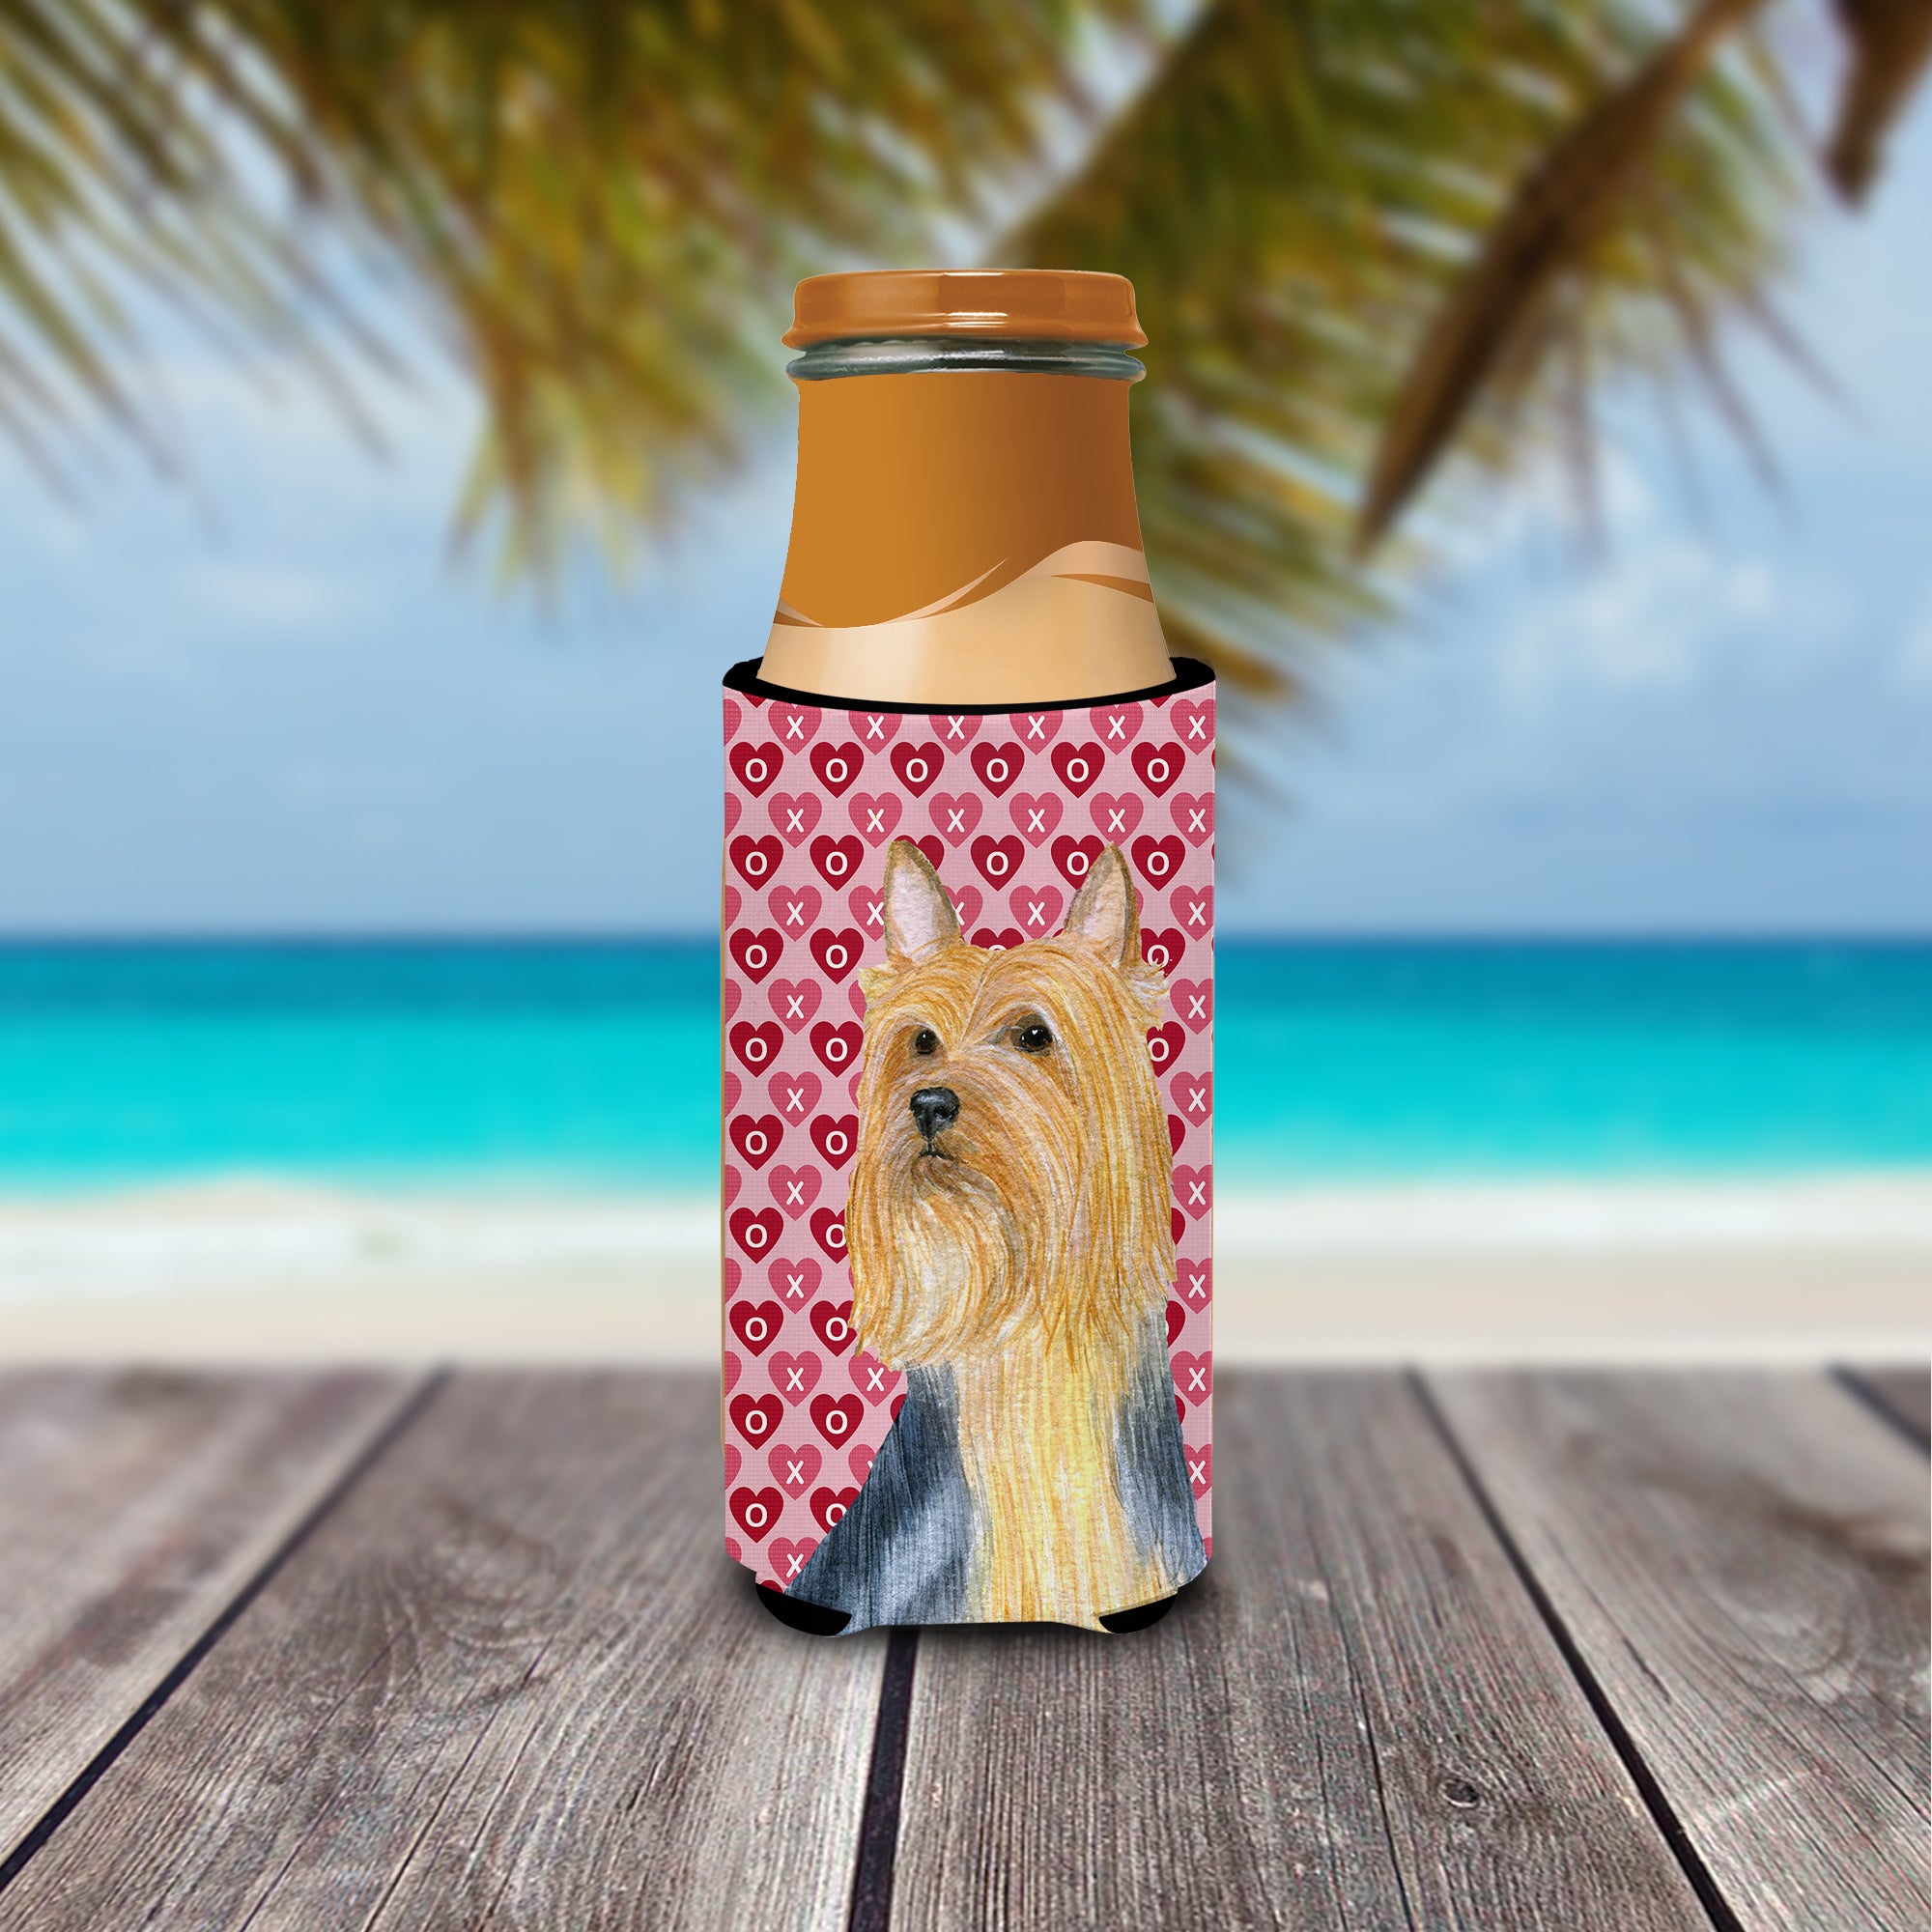 Silky Terrier Hearts Love and Valentine's Day Portrait Ultra Beverage Insulators for slim cans LH9136MUK.